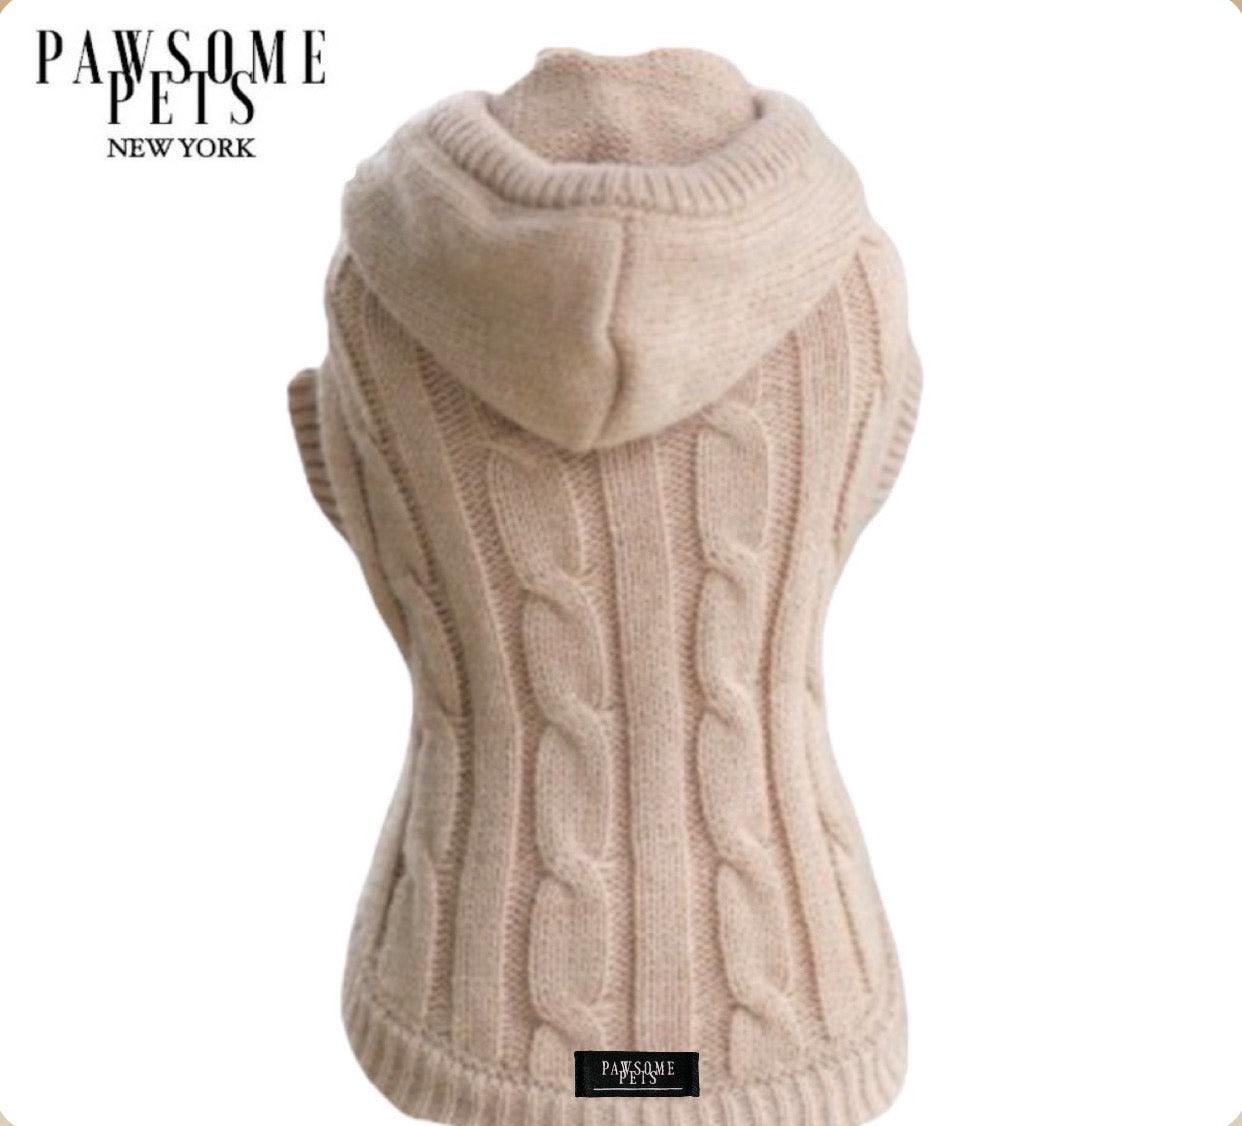 (EXTRA WARM) DOG AND CAT CABLE KNIT SWEATER WITH HAT - BEIGE - Pawsomepetsnewyork